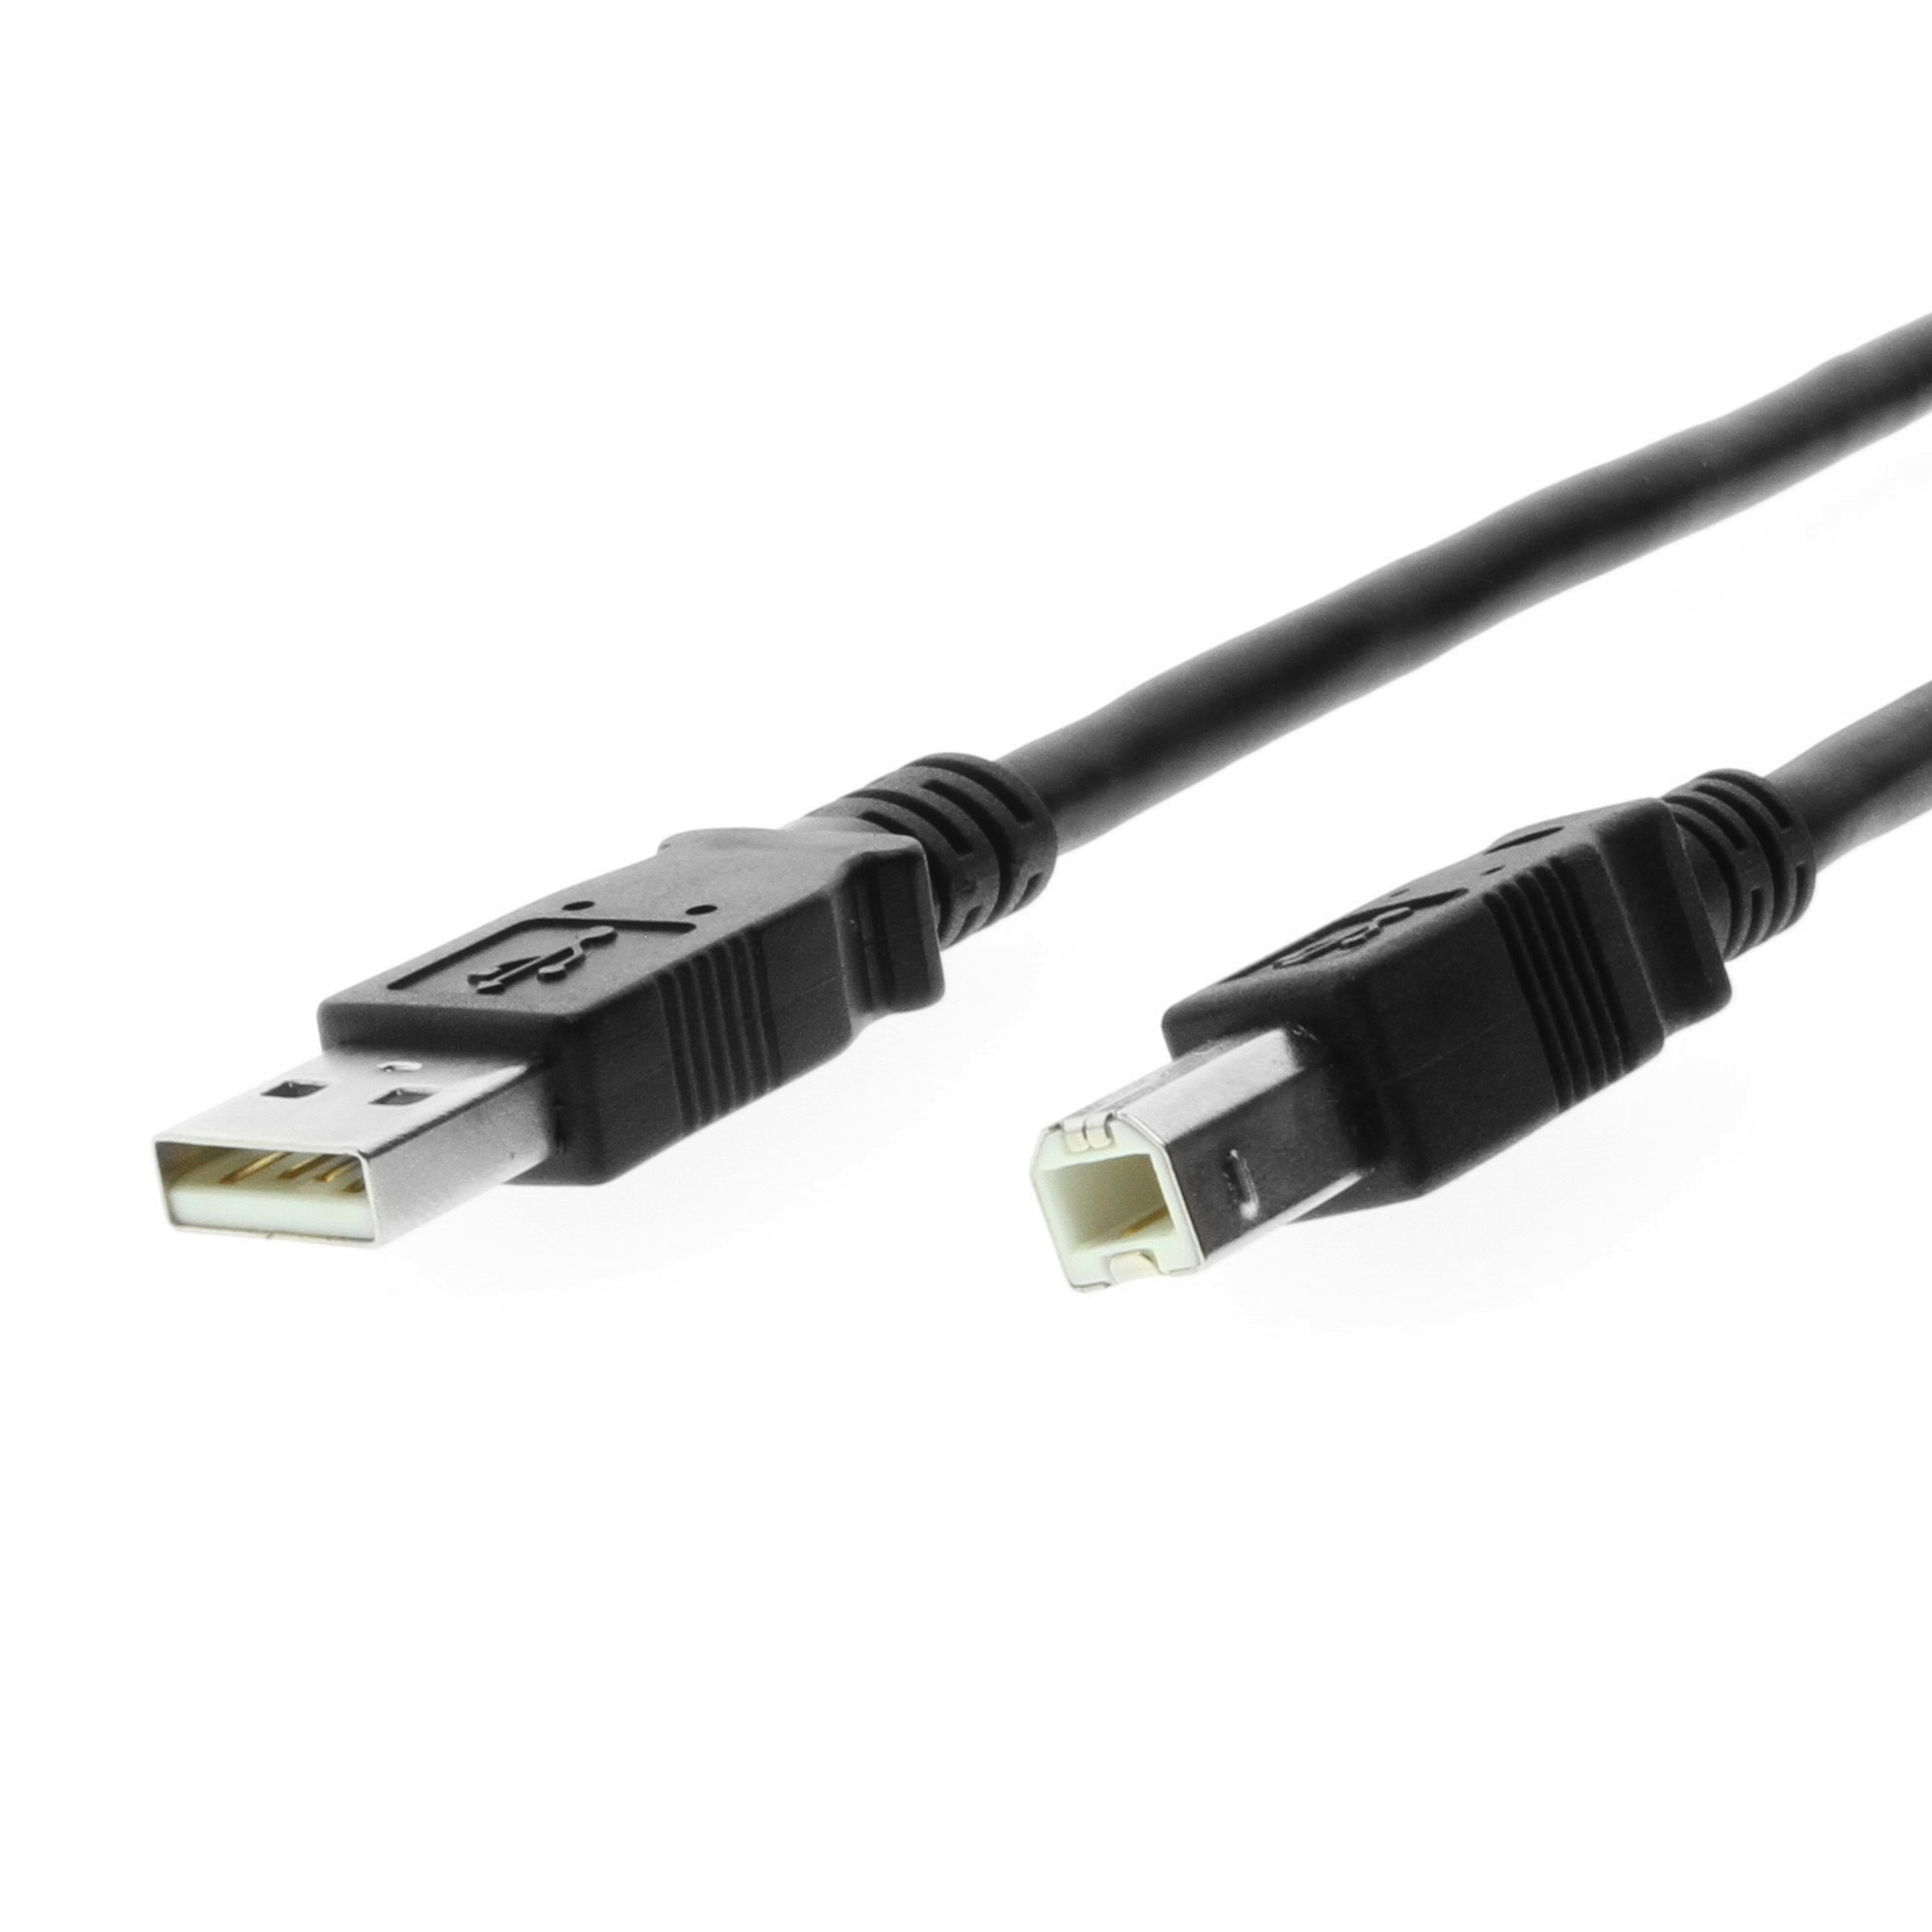 Extreme Power 2m Black USB Device Cable USB 2.0 A B Cable 24/20 AWG